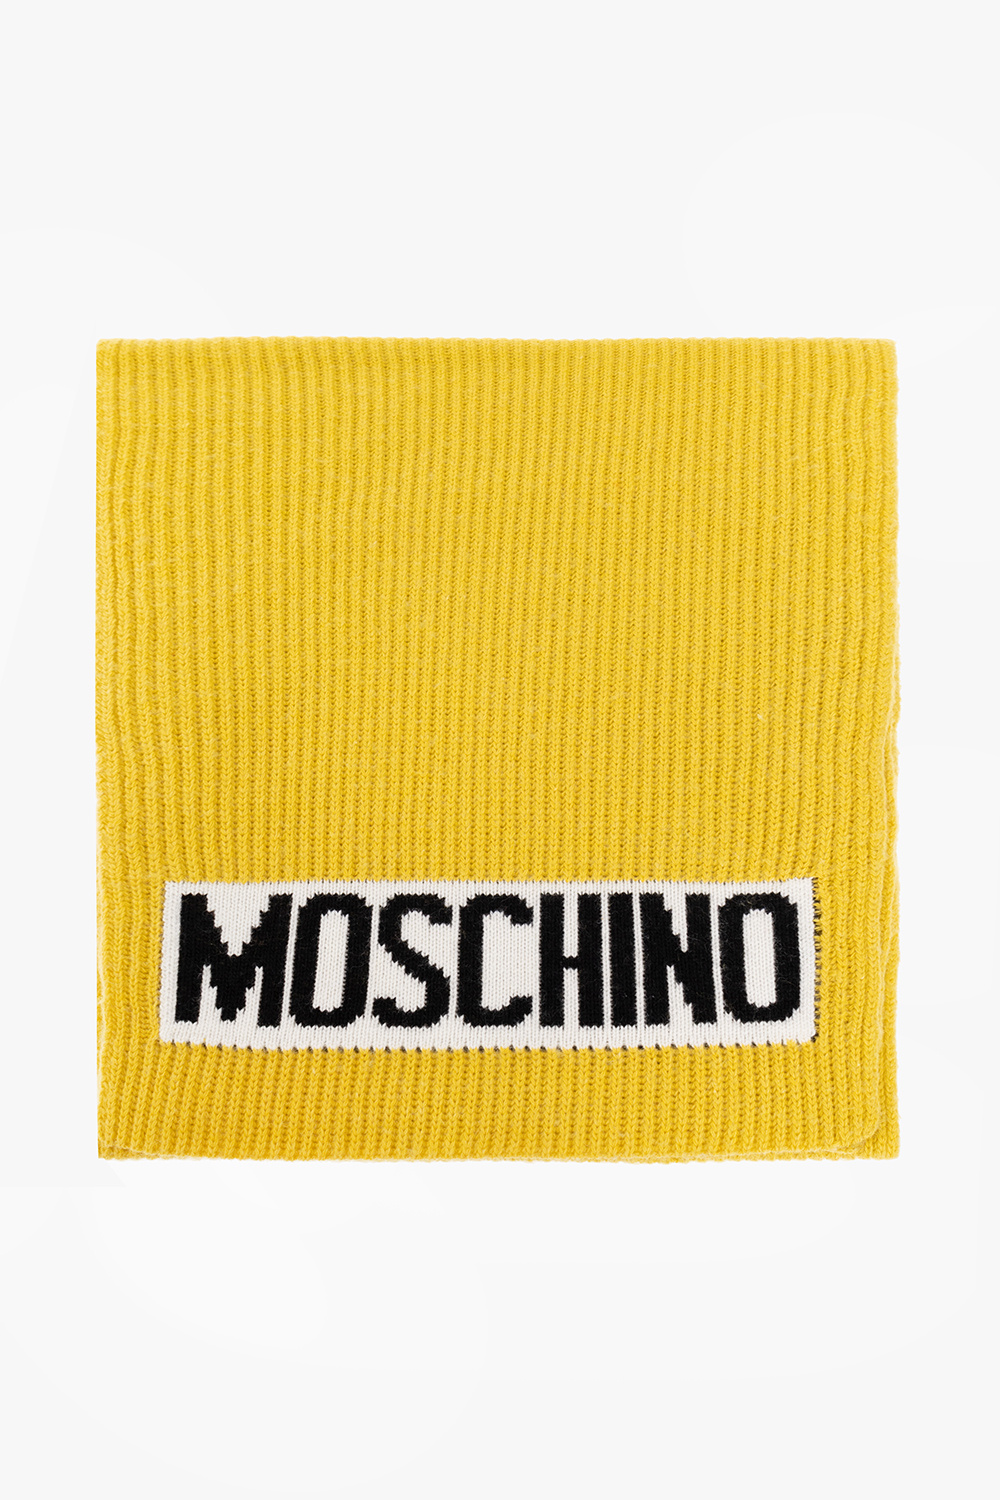 Moschino sneakers of this season